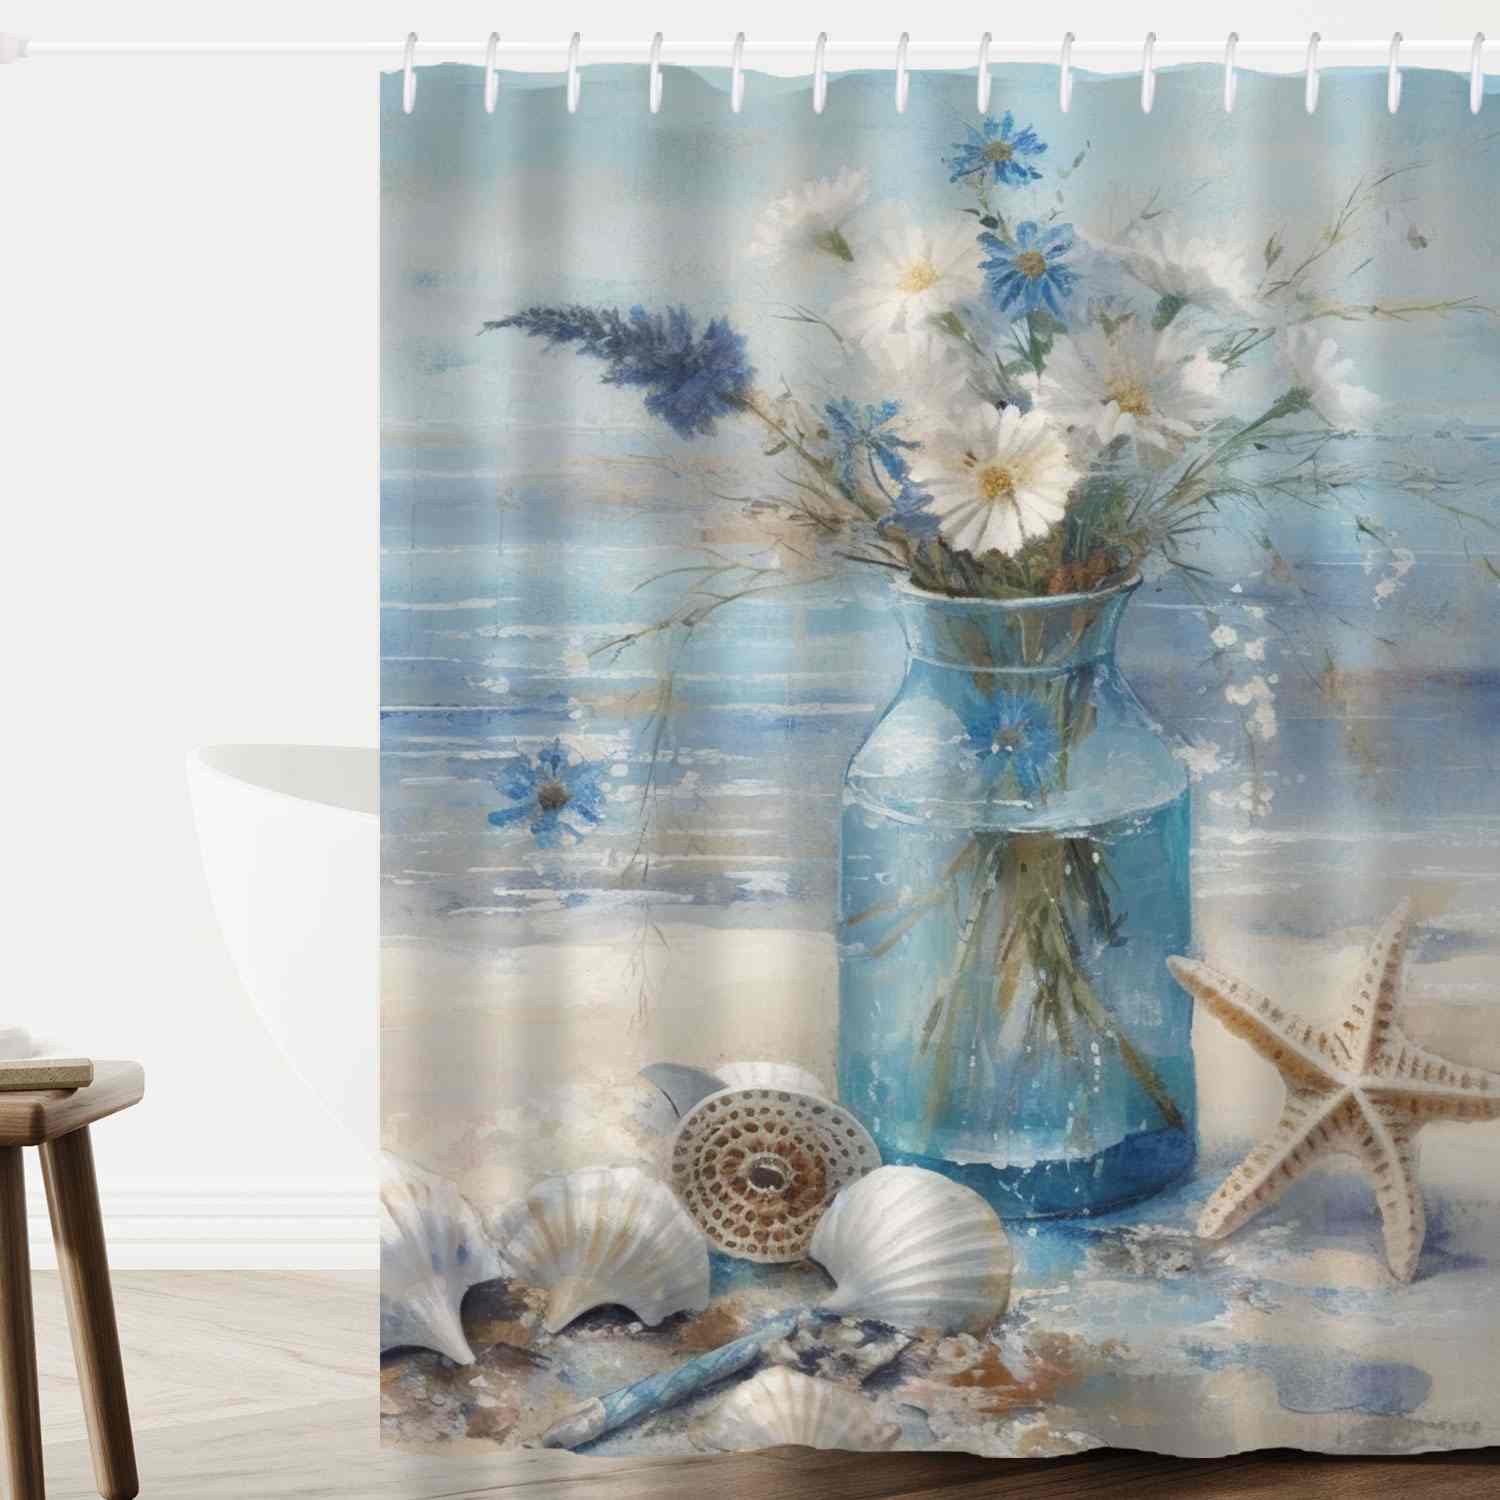 A blue shower curtain with seashells and flowers.